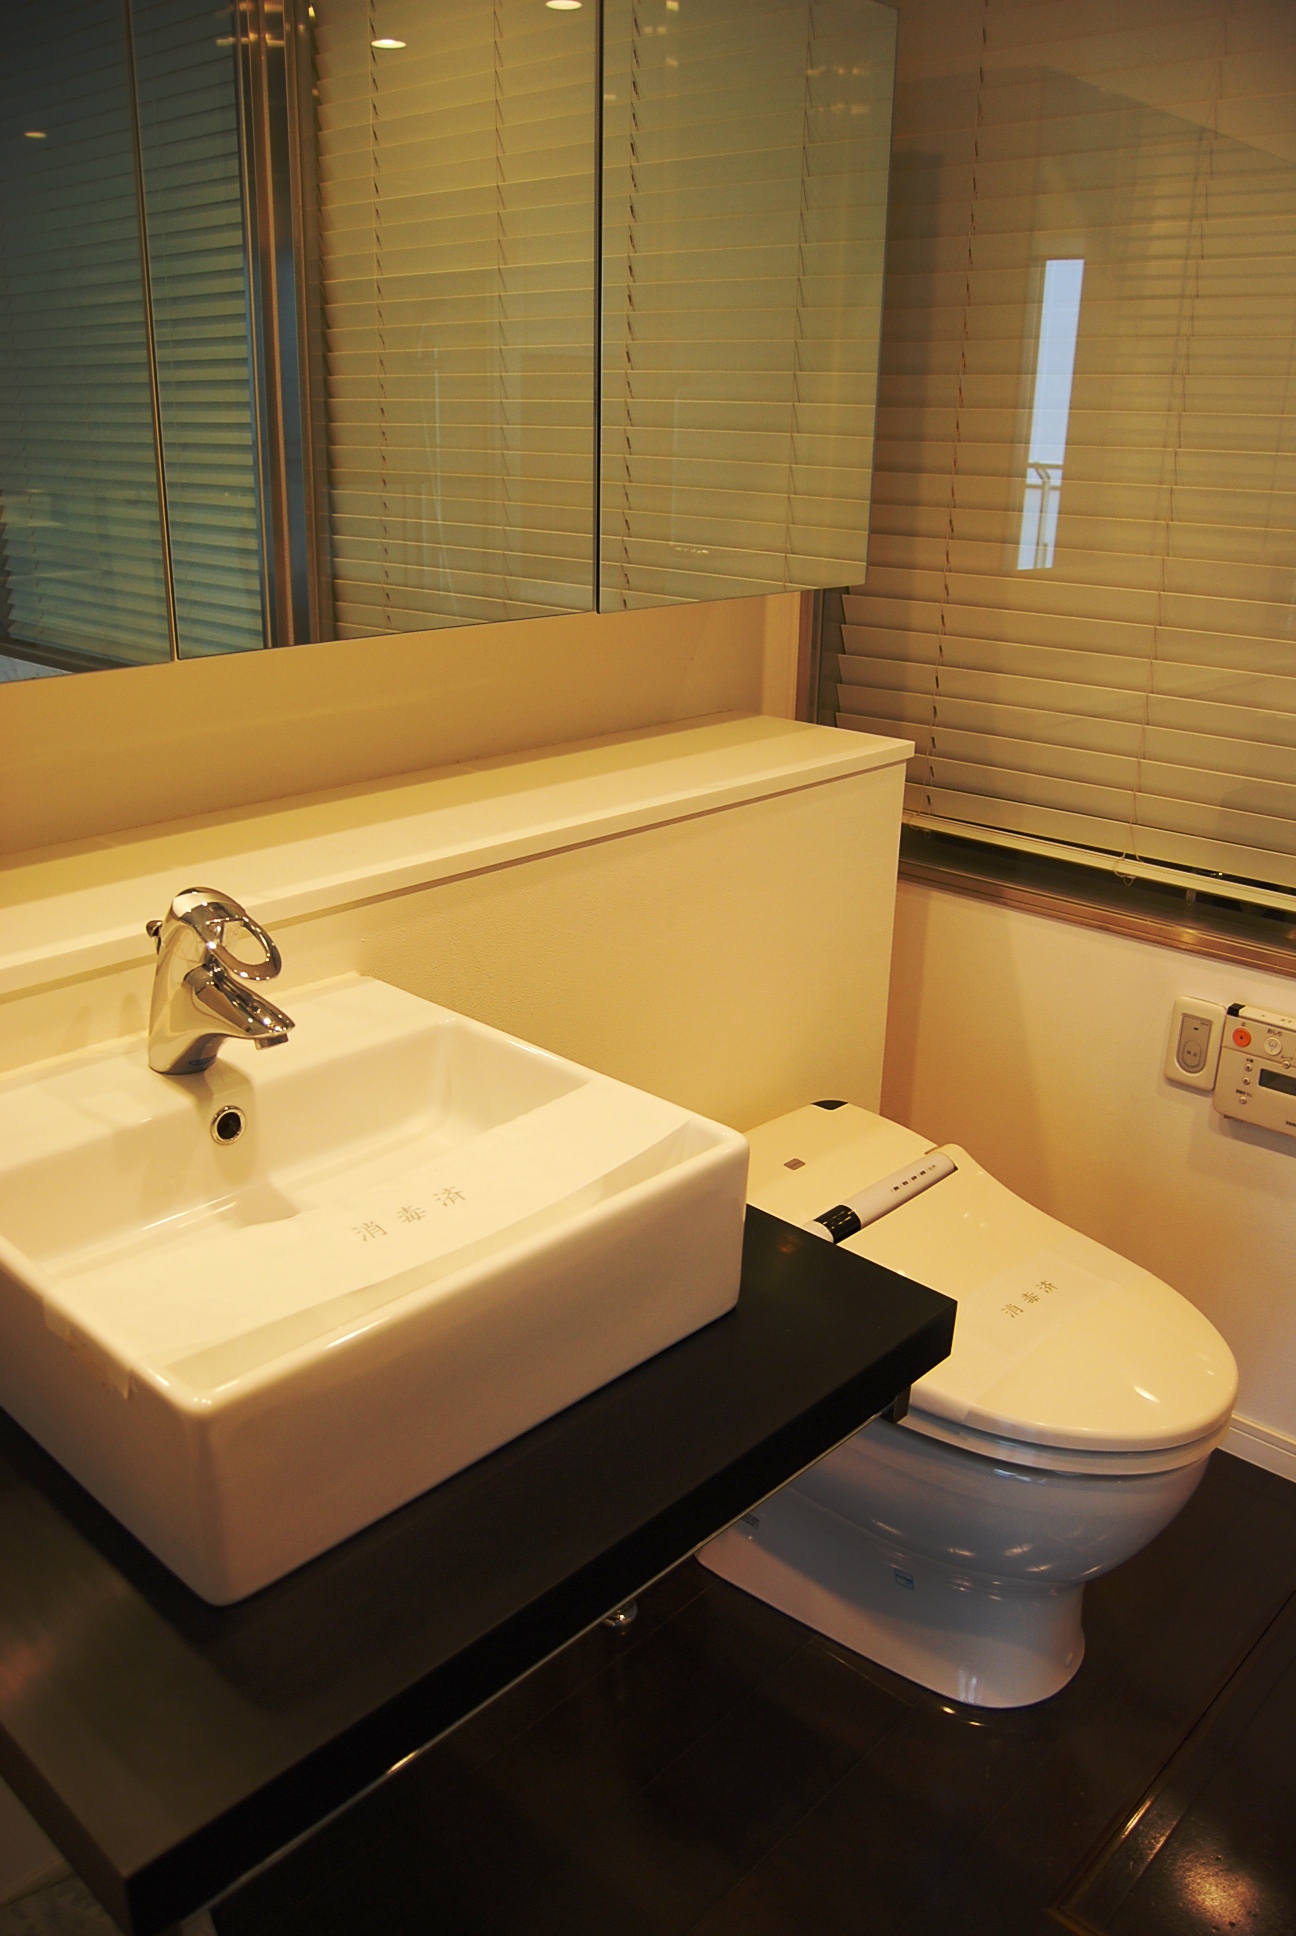 Washroom. Basin space reminiscent of a luxury hotel